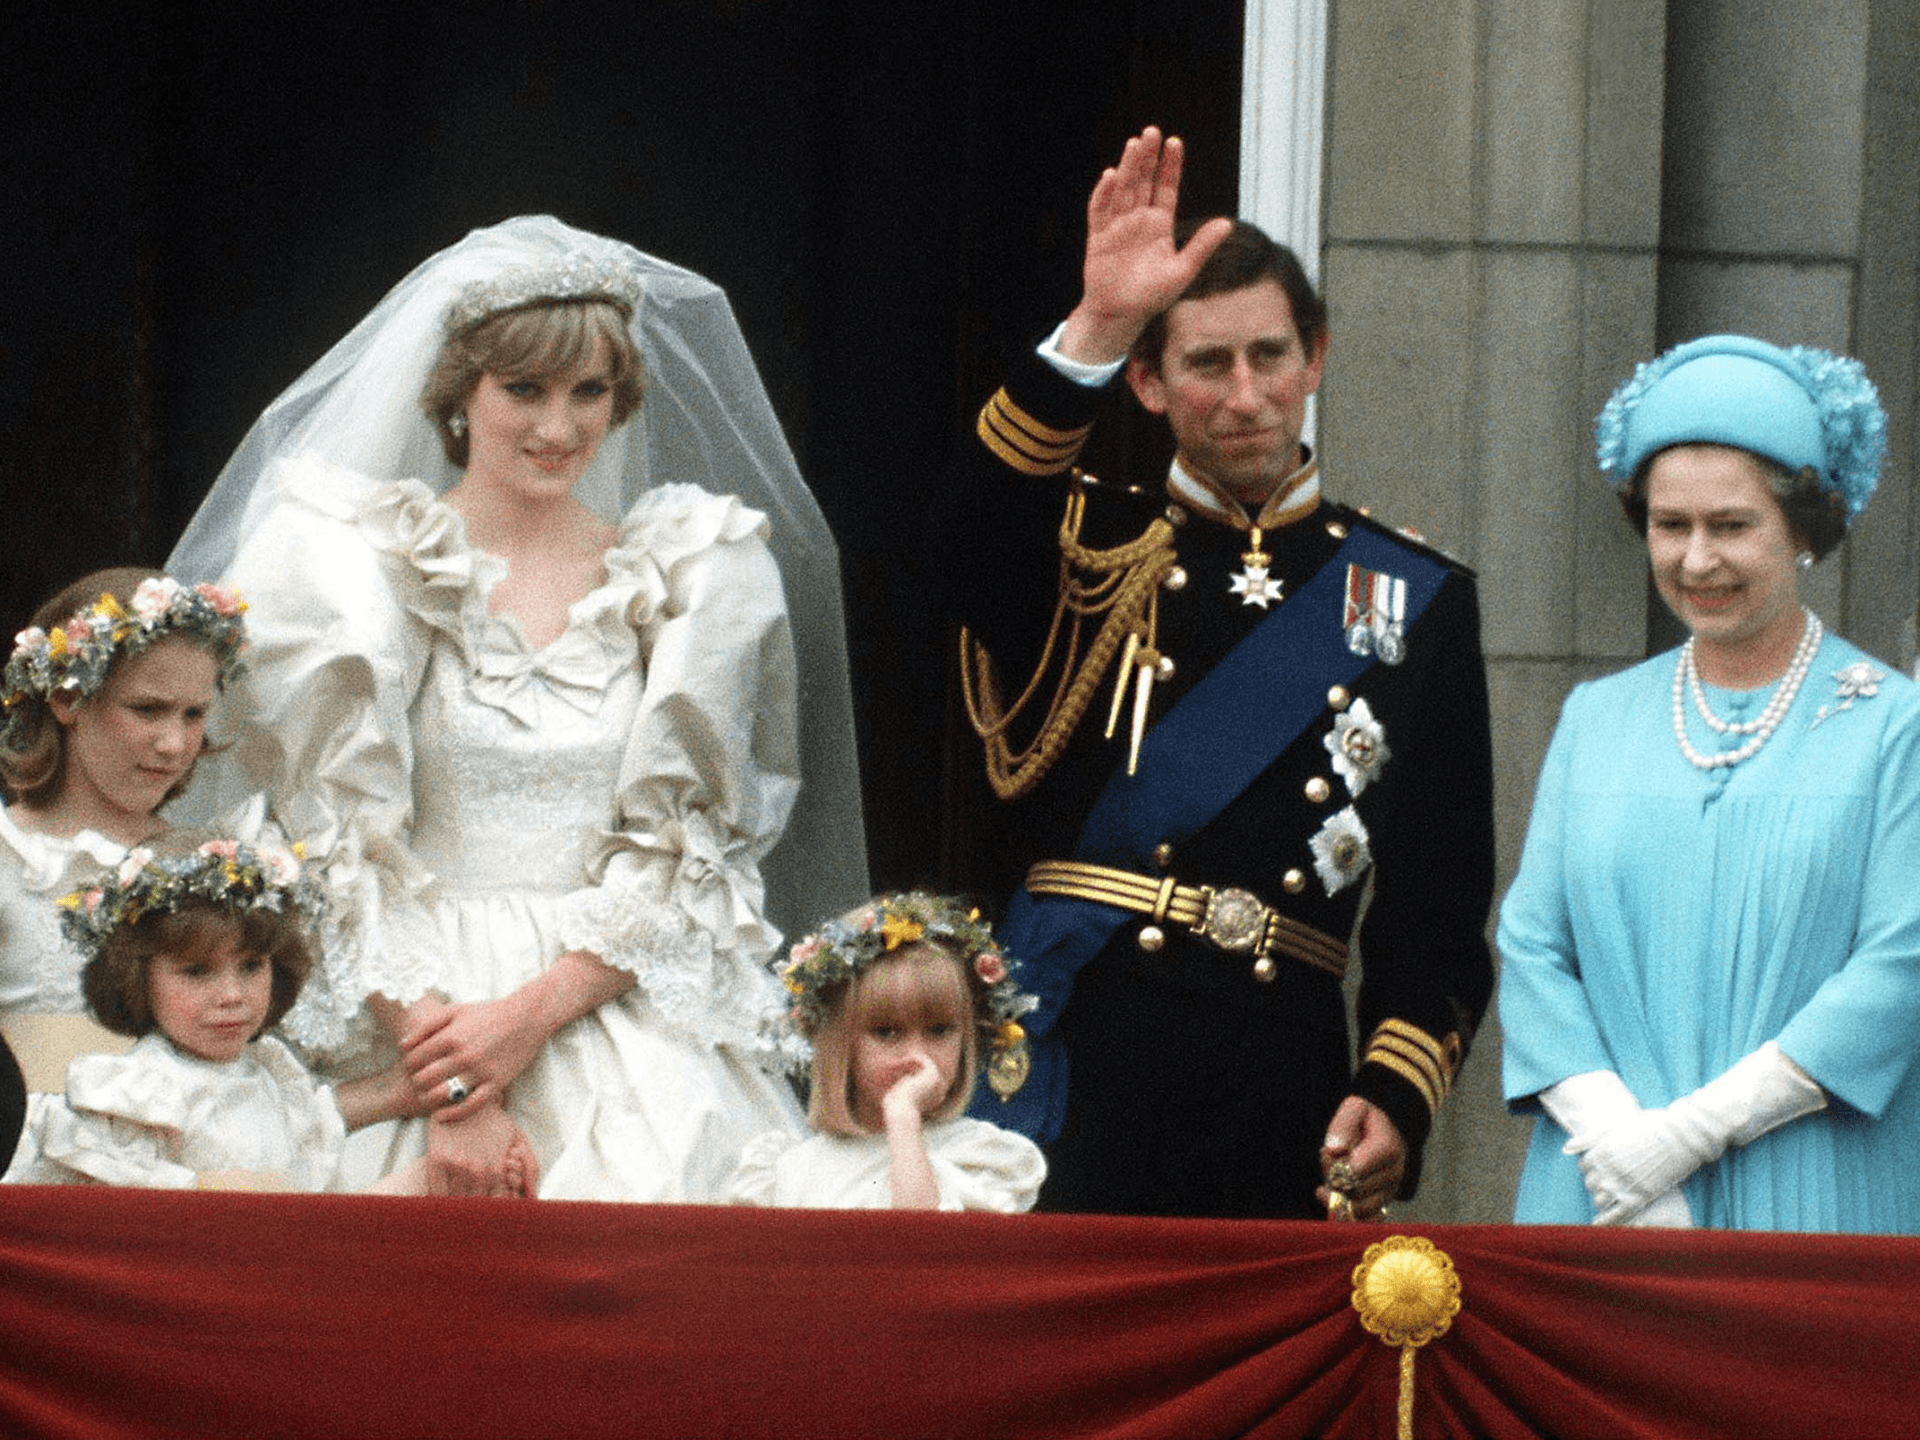 The Prince and Princess of Wales pose on the balcony of Buckingham Palace on their wedding day, with the Queen and some of the bridesmaids, 29th July 1981. (Photo by Terry Fincher/Princess Diana Archive/Getty Images)